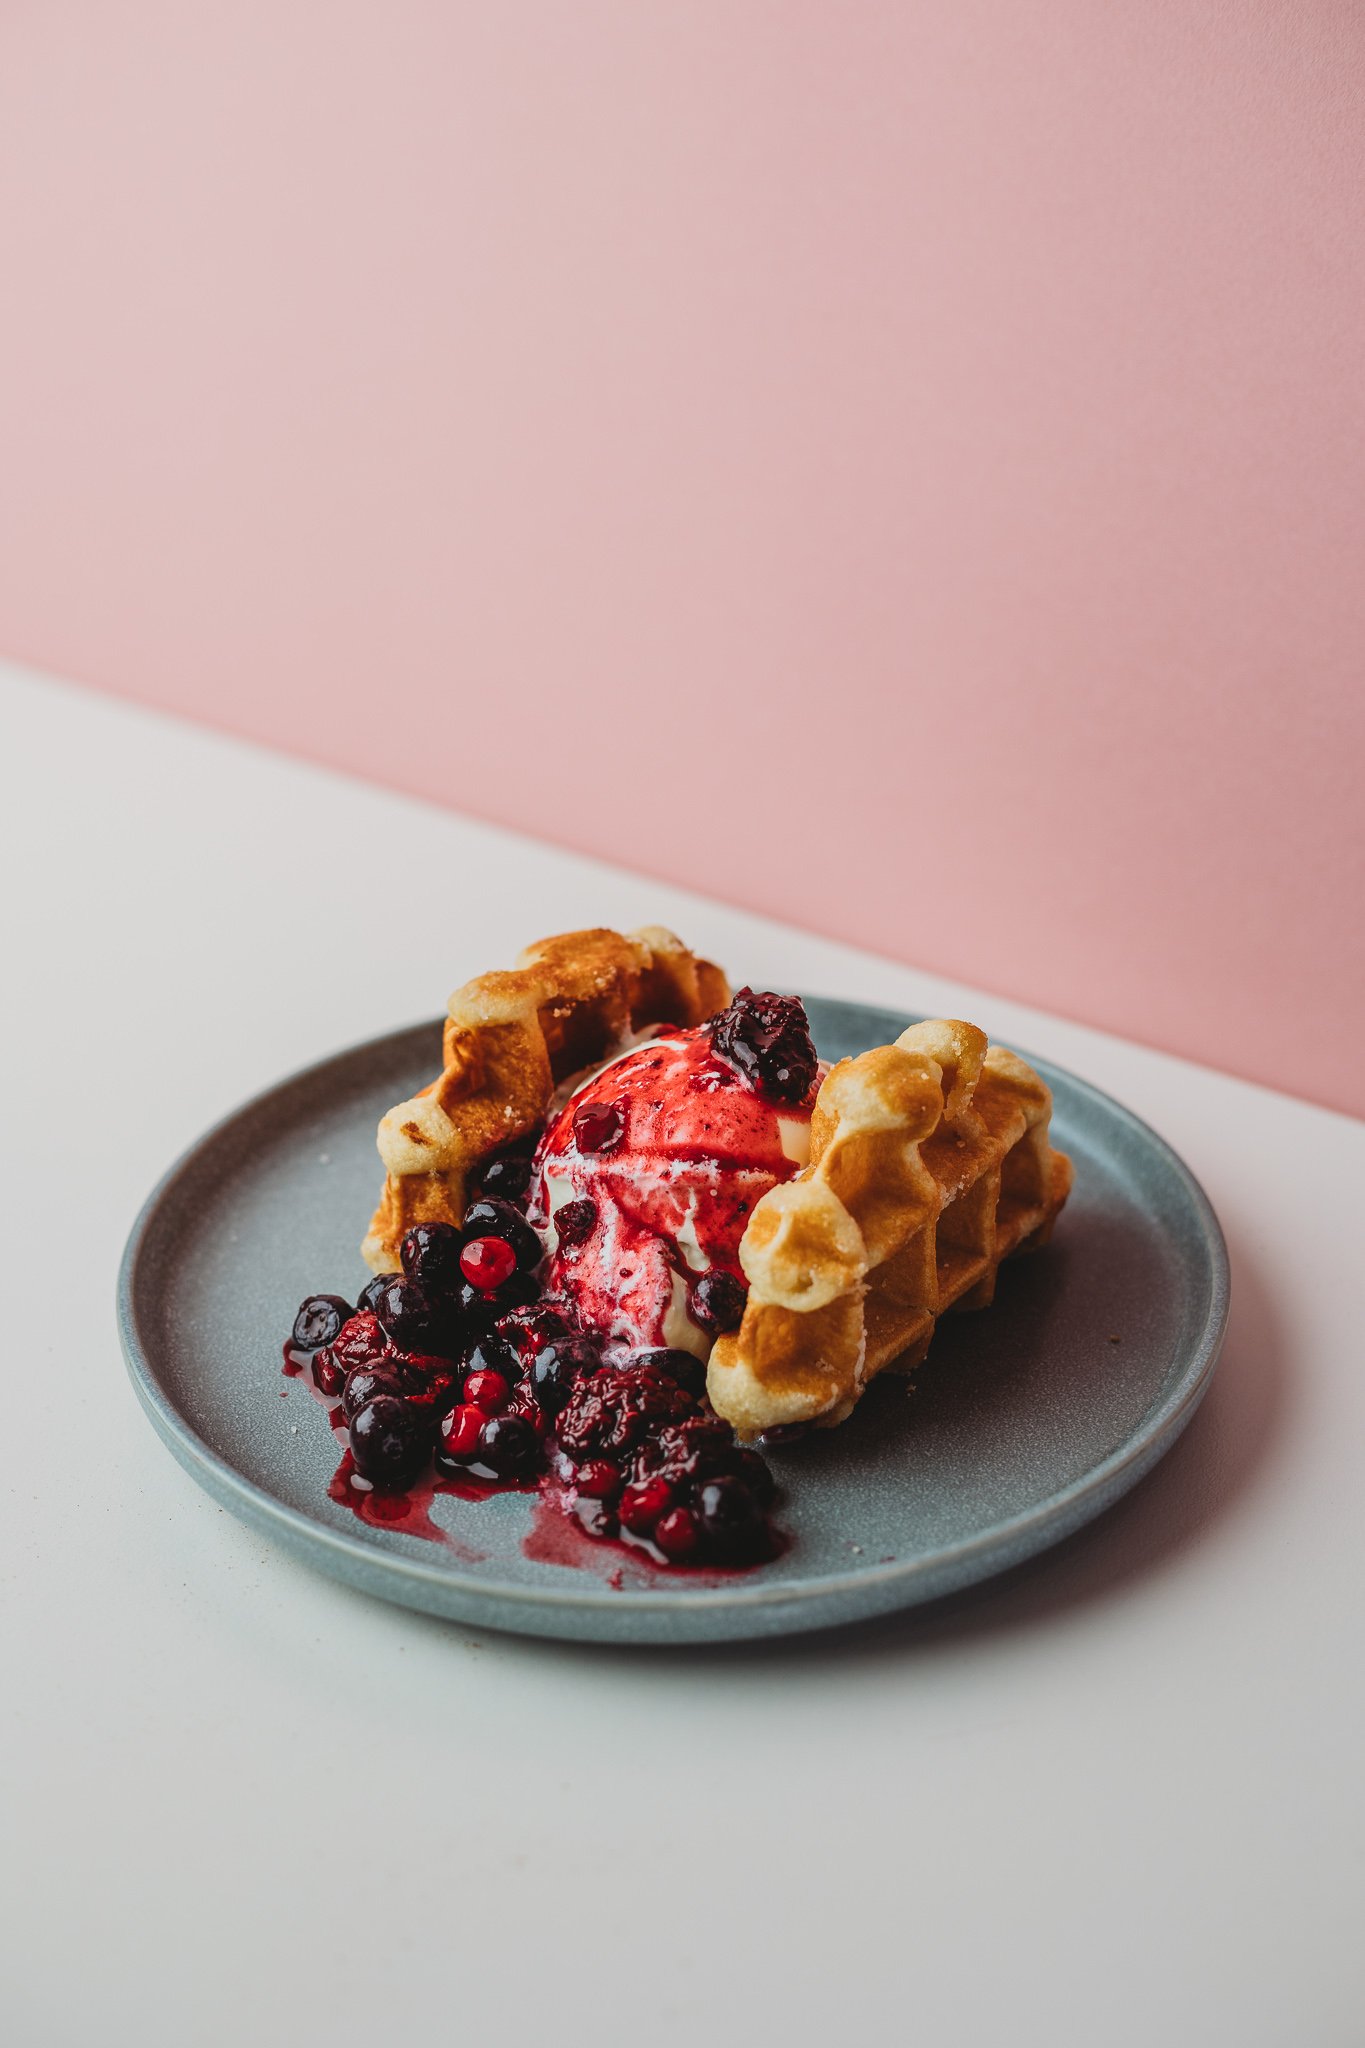 Canberra food photographer - waffles and berries (Copy)